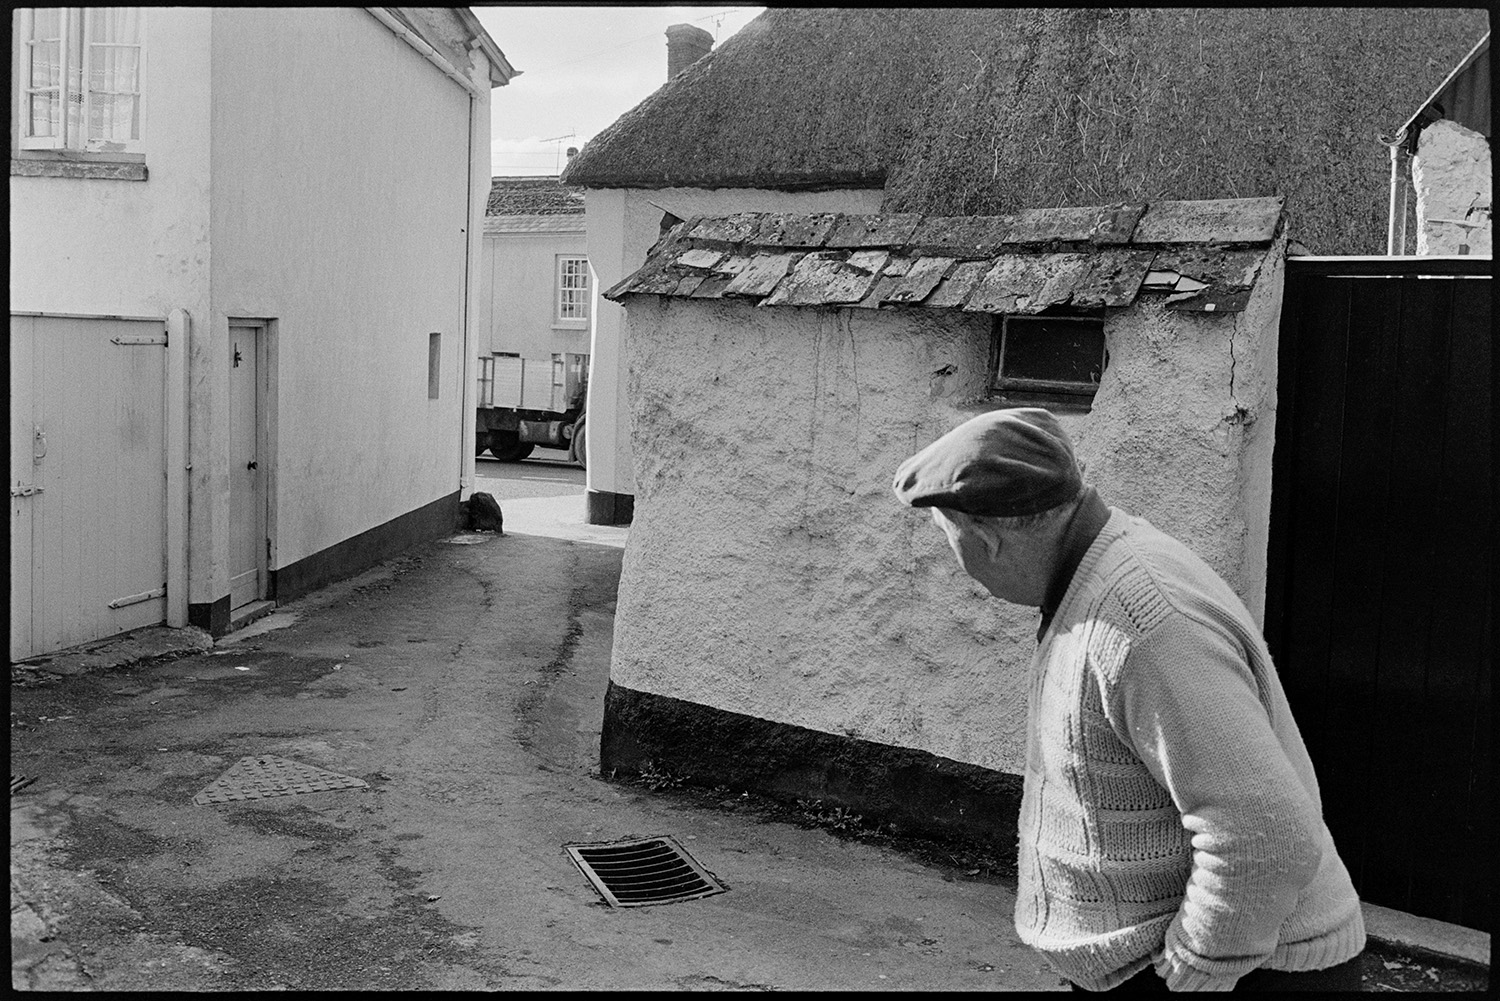 Back lane with cob walls. 
[Cob and thatch buildings in Buddle Lane, Hatherleigh. A man is watching Hatherleigh Carnival from the lane.]